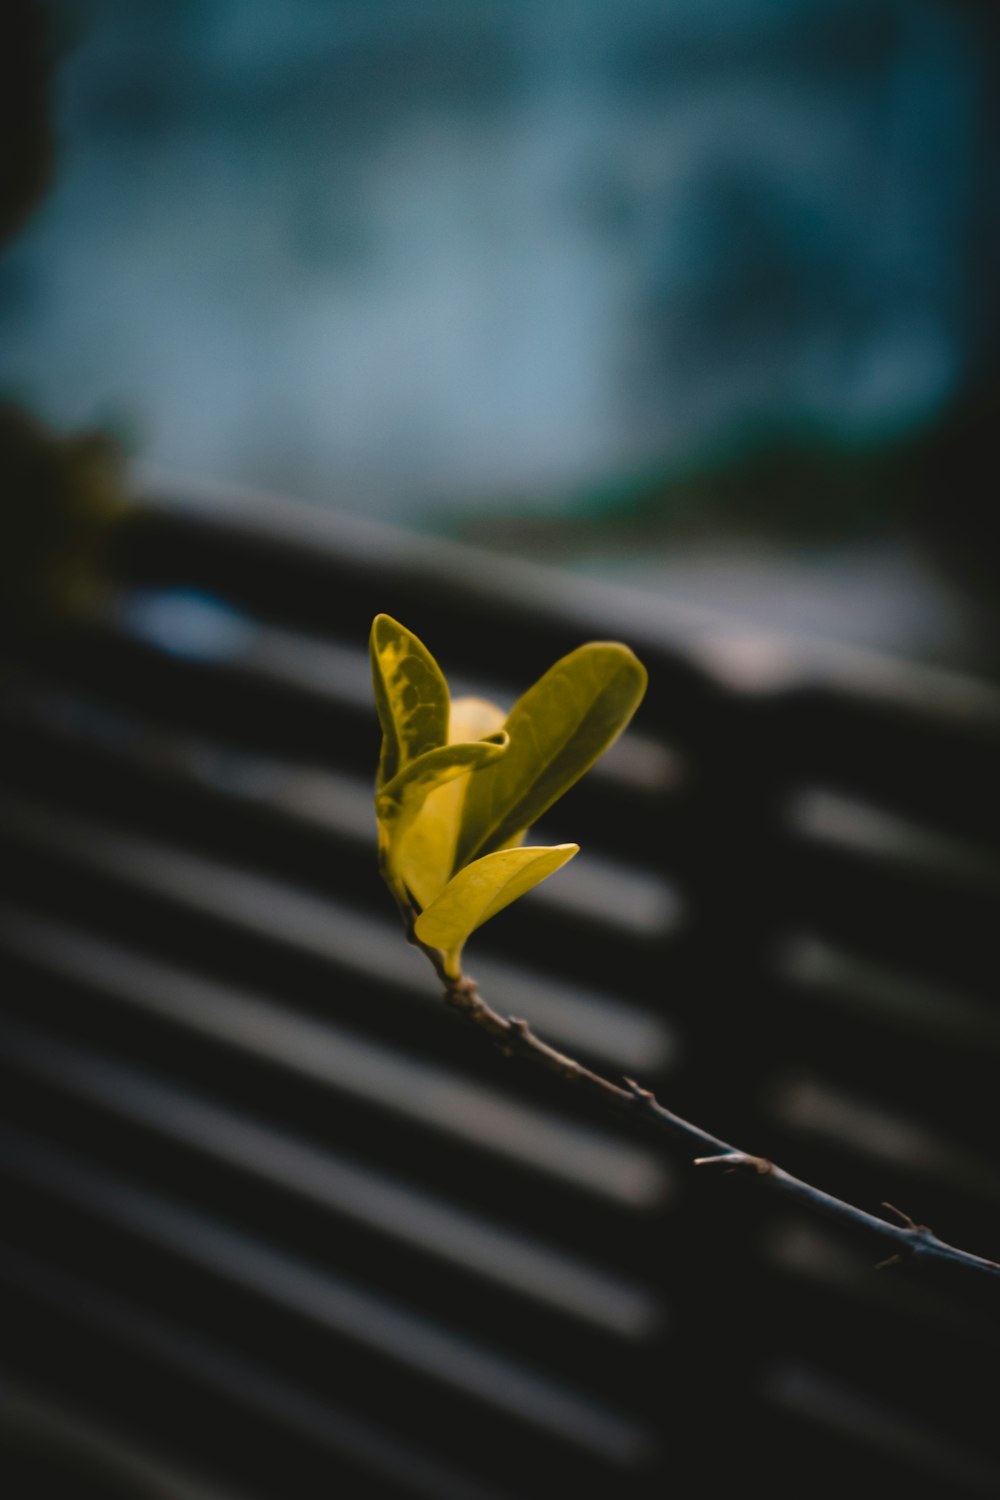 a single yellow flower on a thin twig